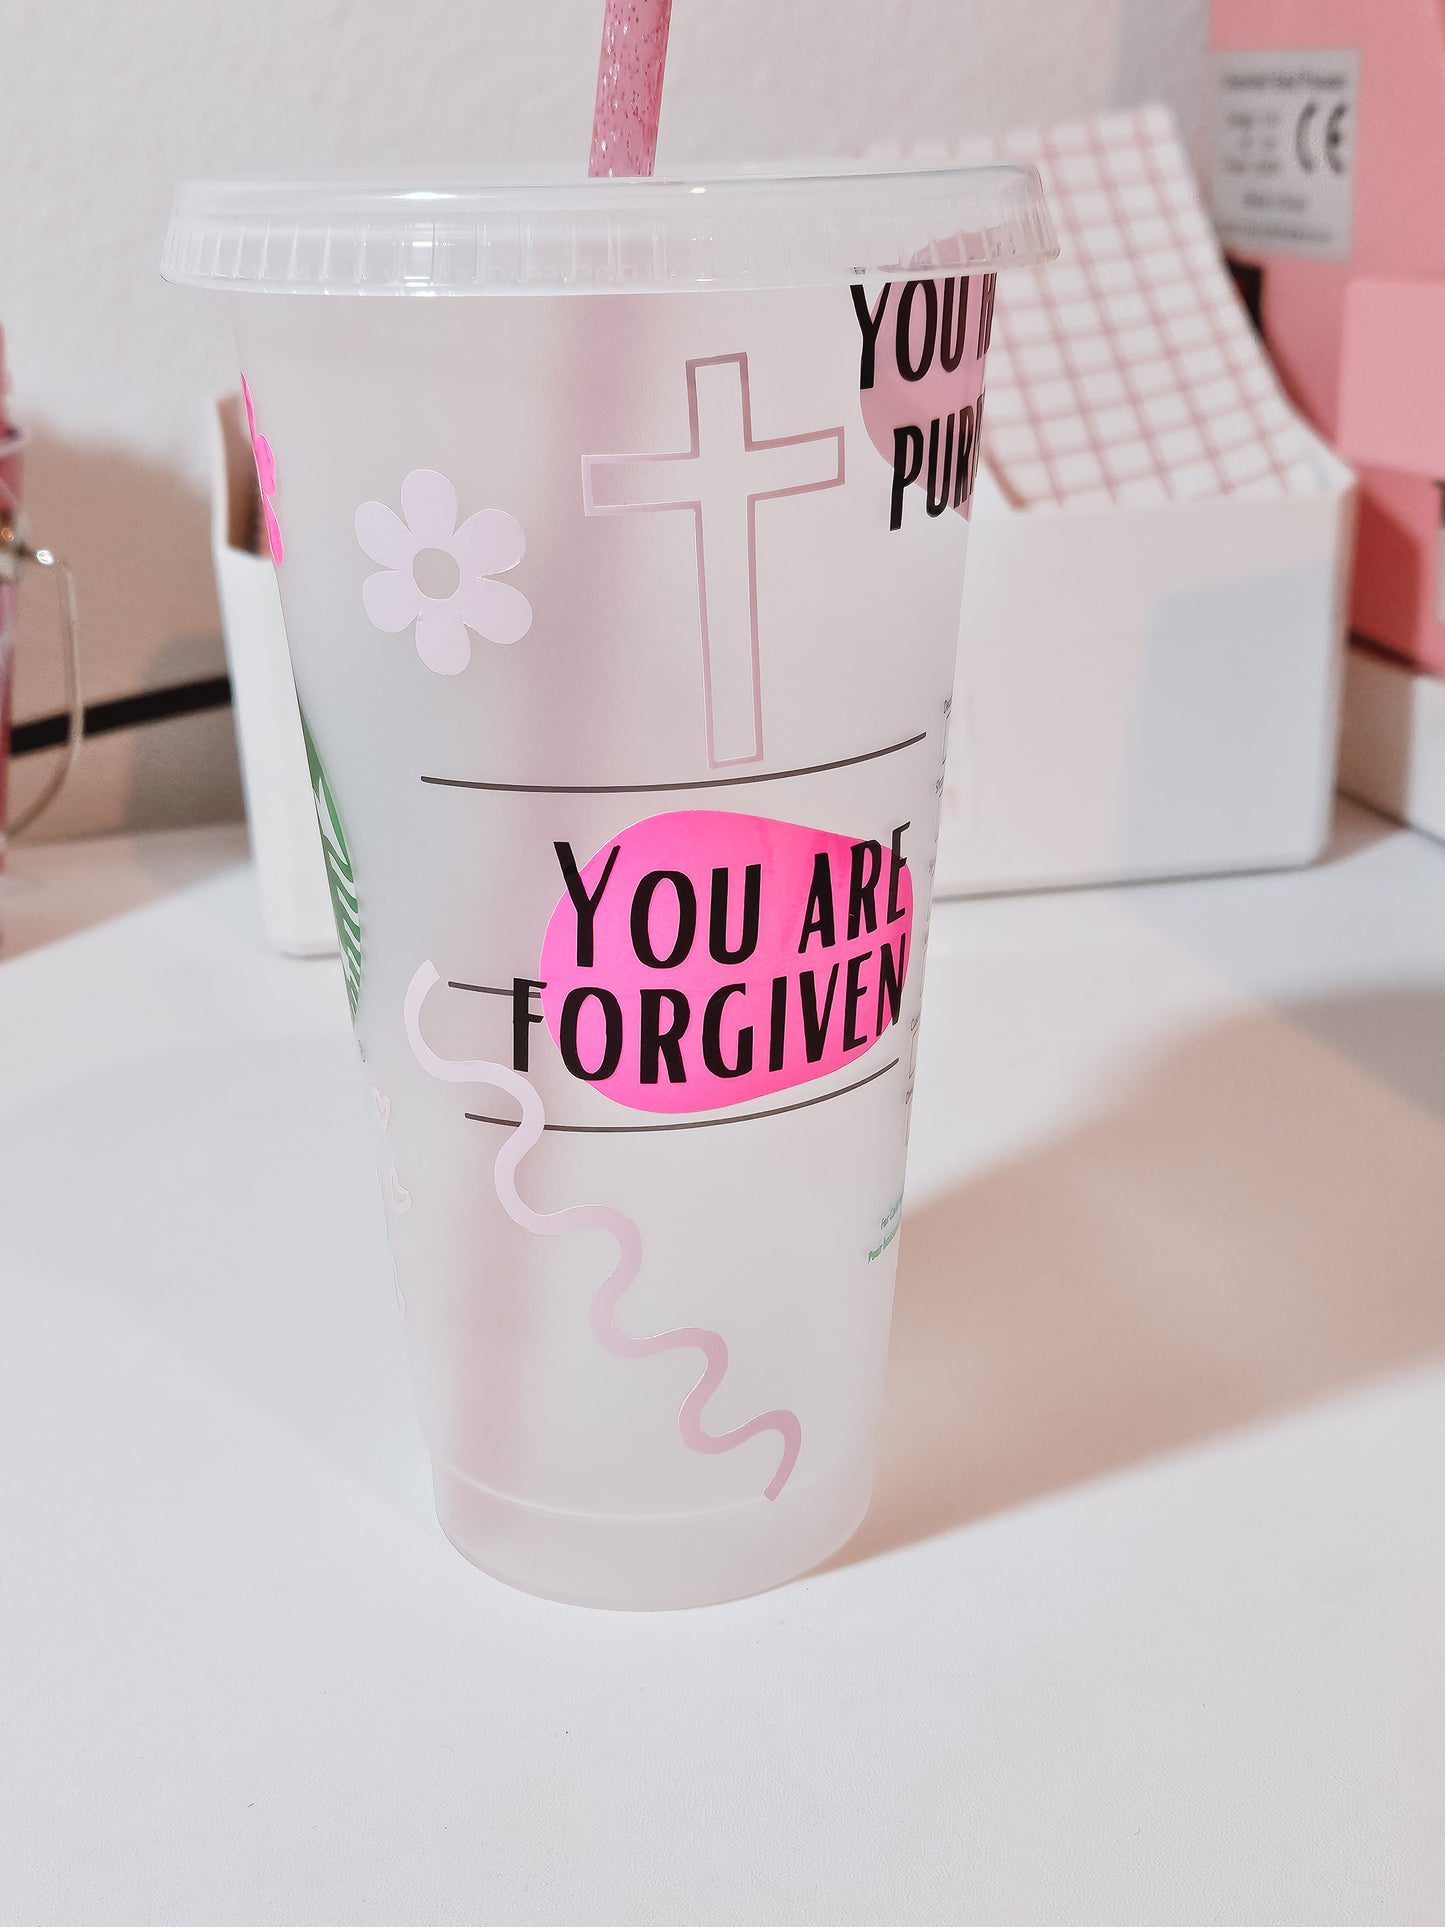 You Have a Purpose Cold Cup